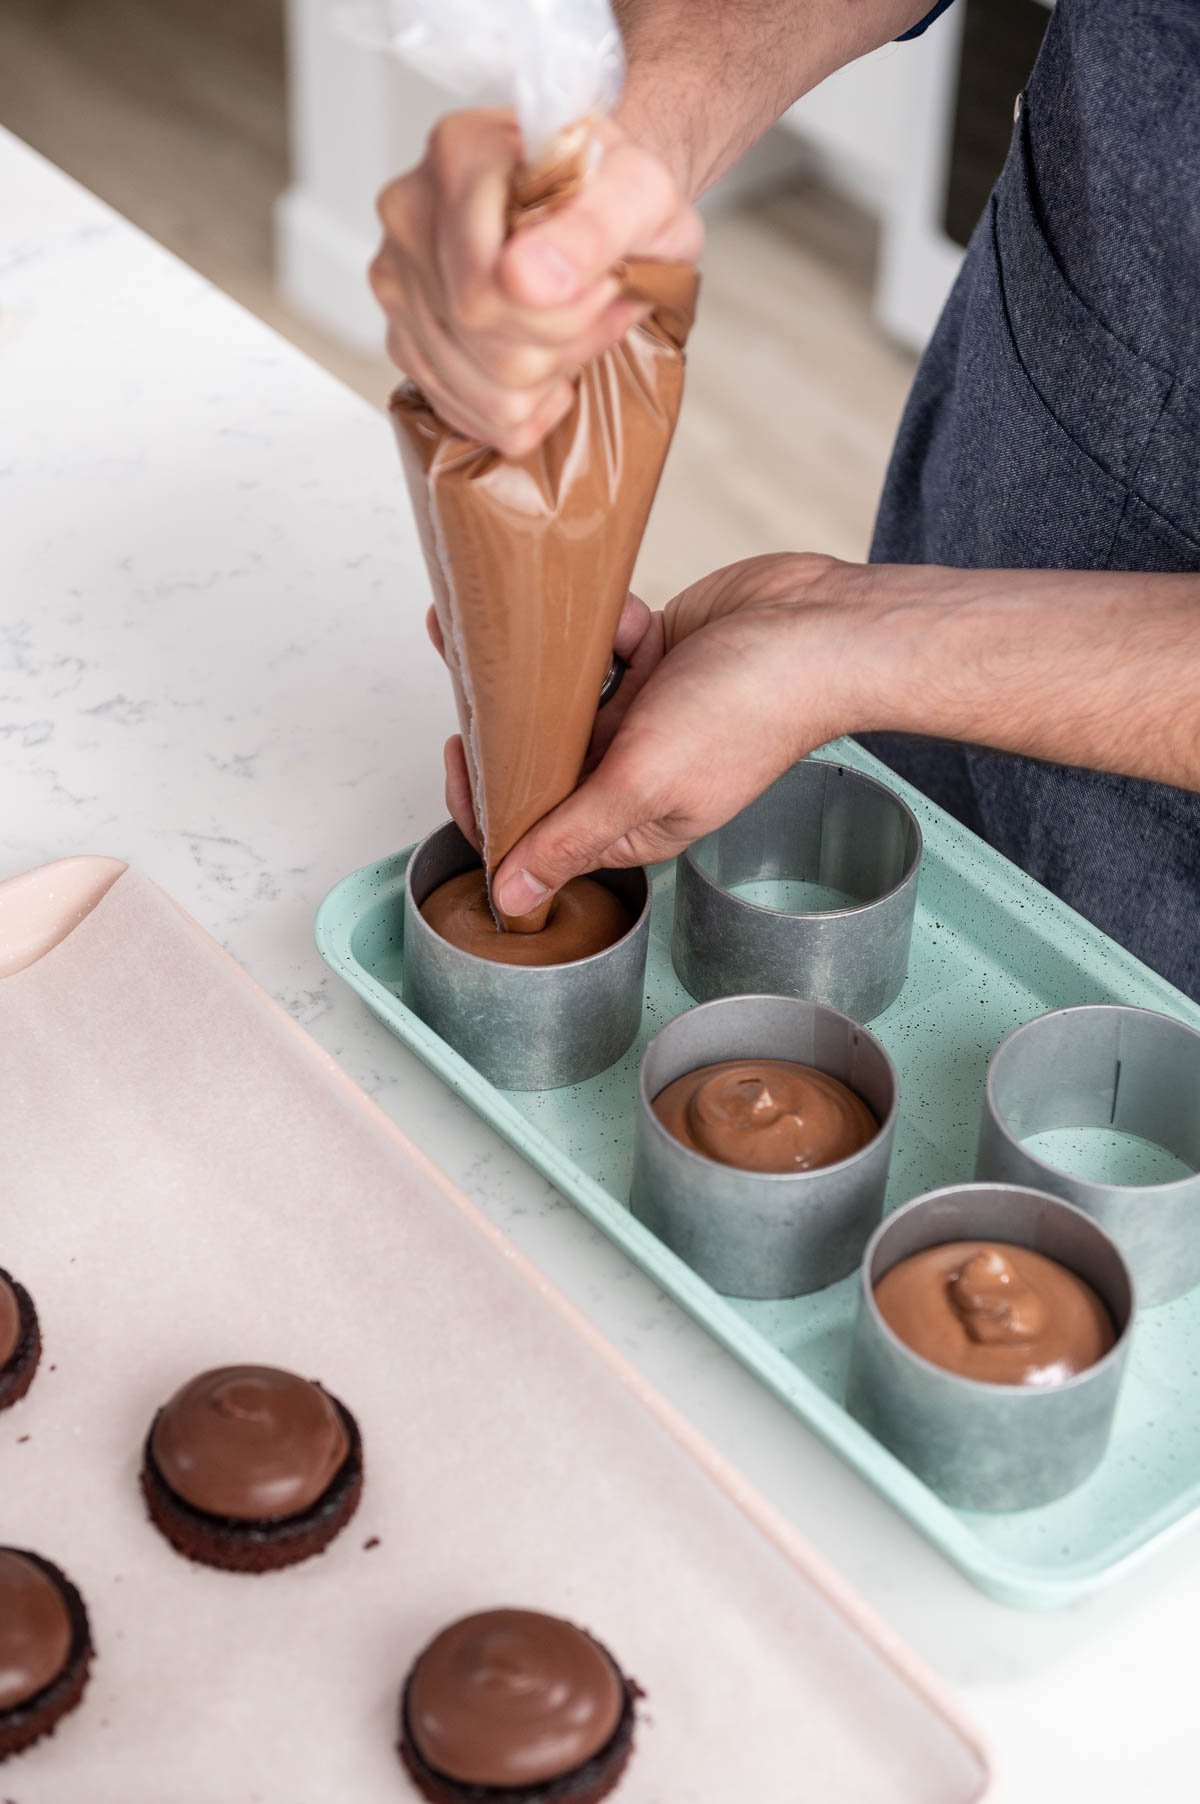 hand piping mousse into entremet pans